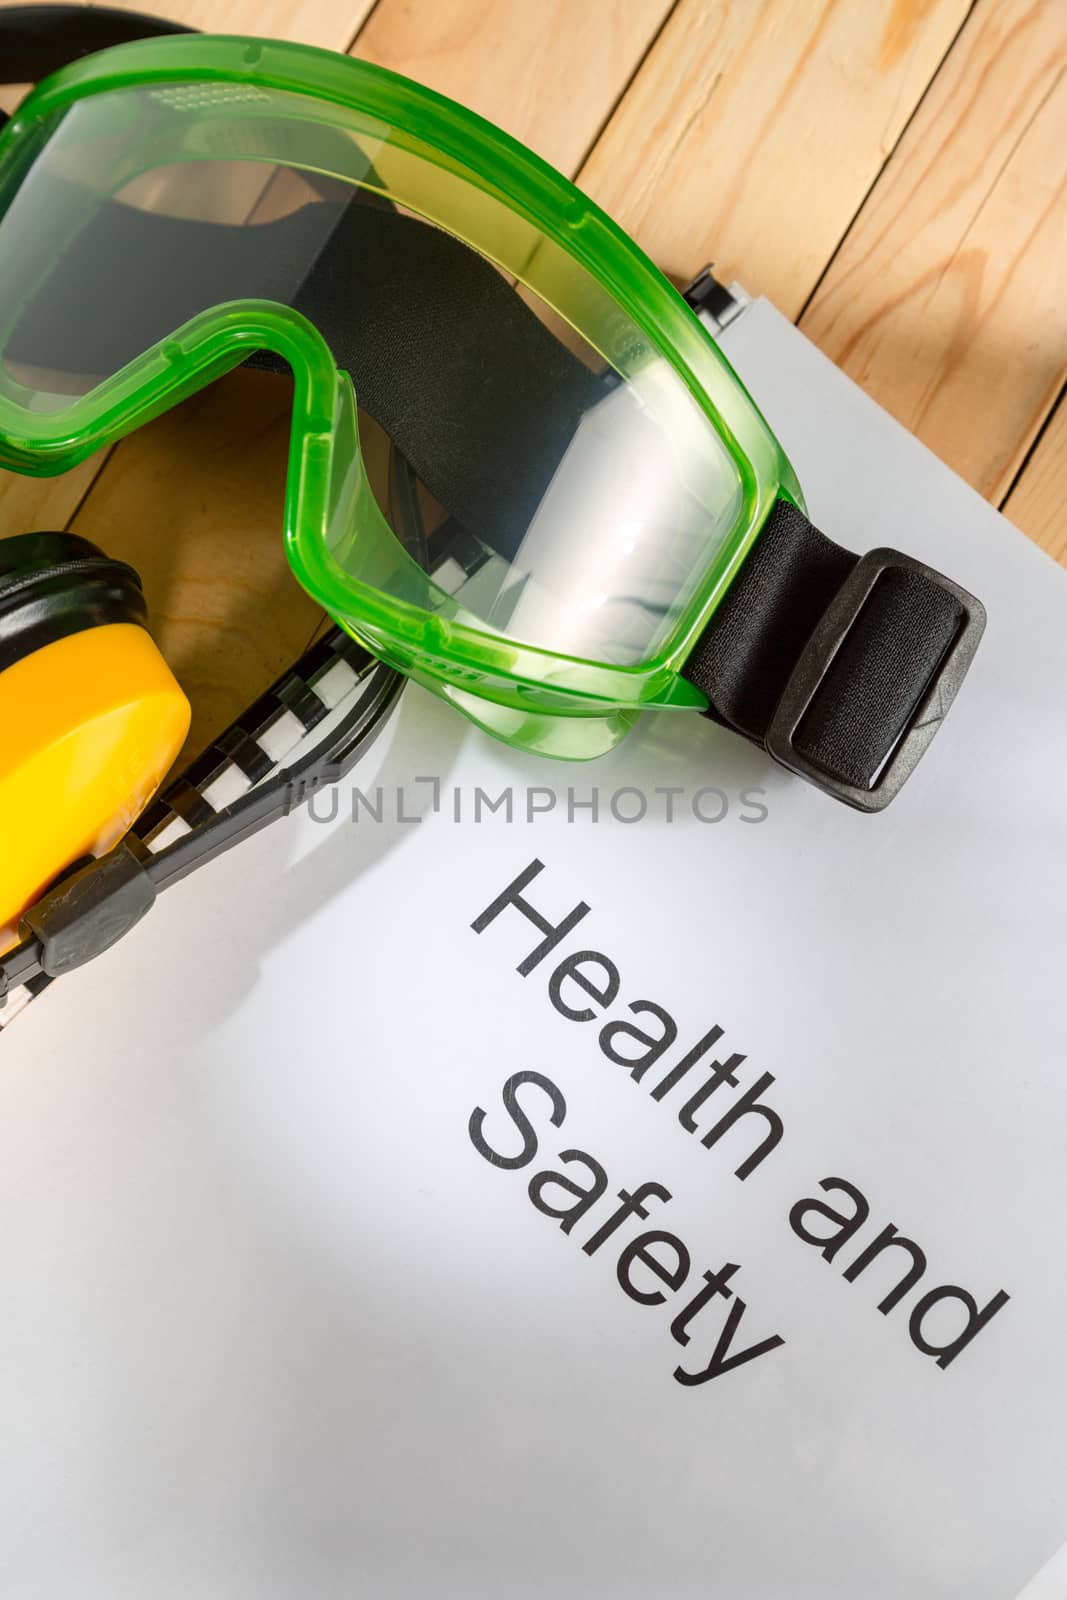 Register with goggles and earphones on wooden background